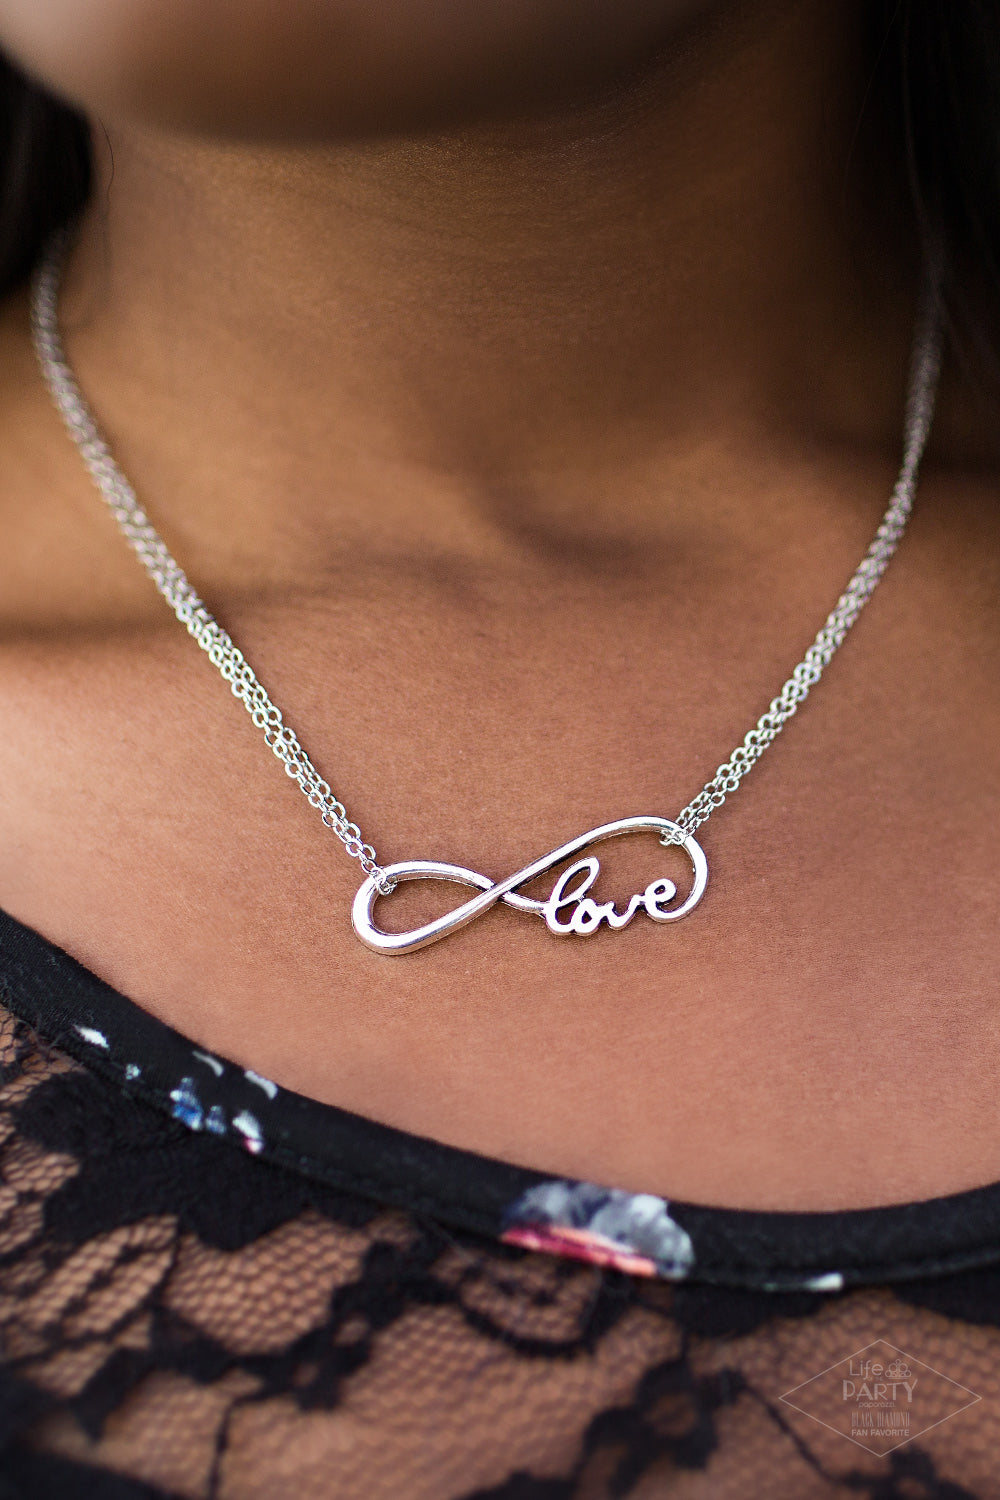 We Found Love Silver Necklace